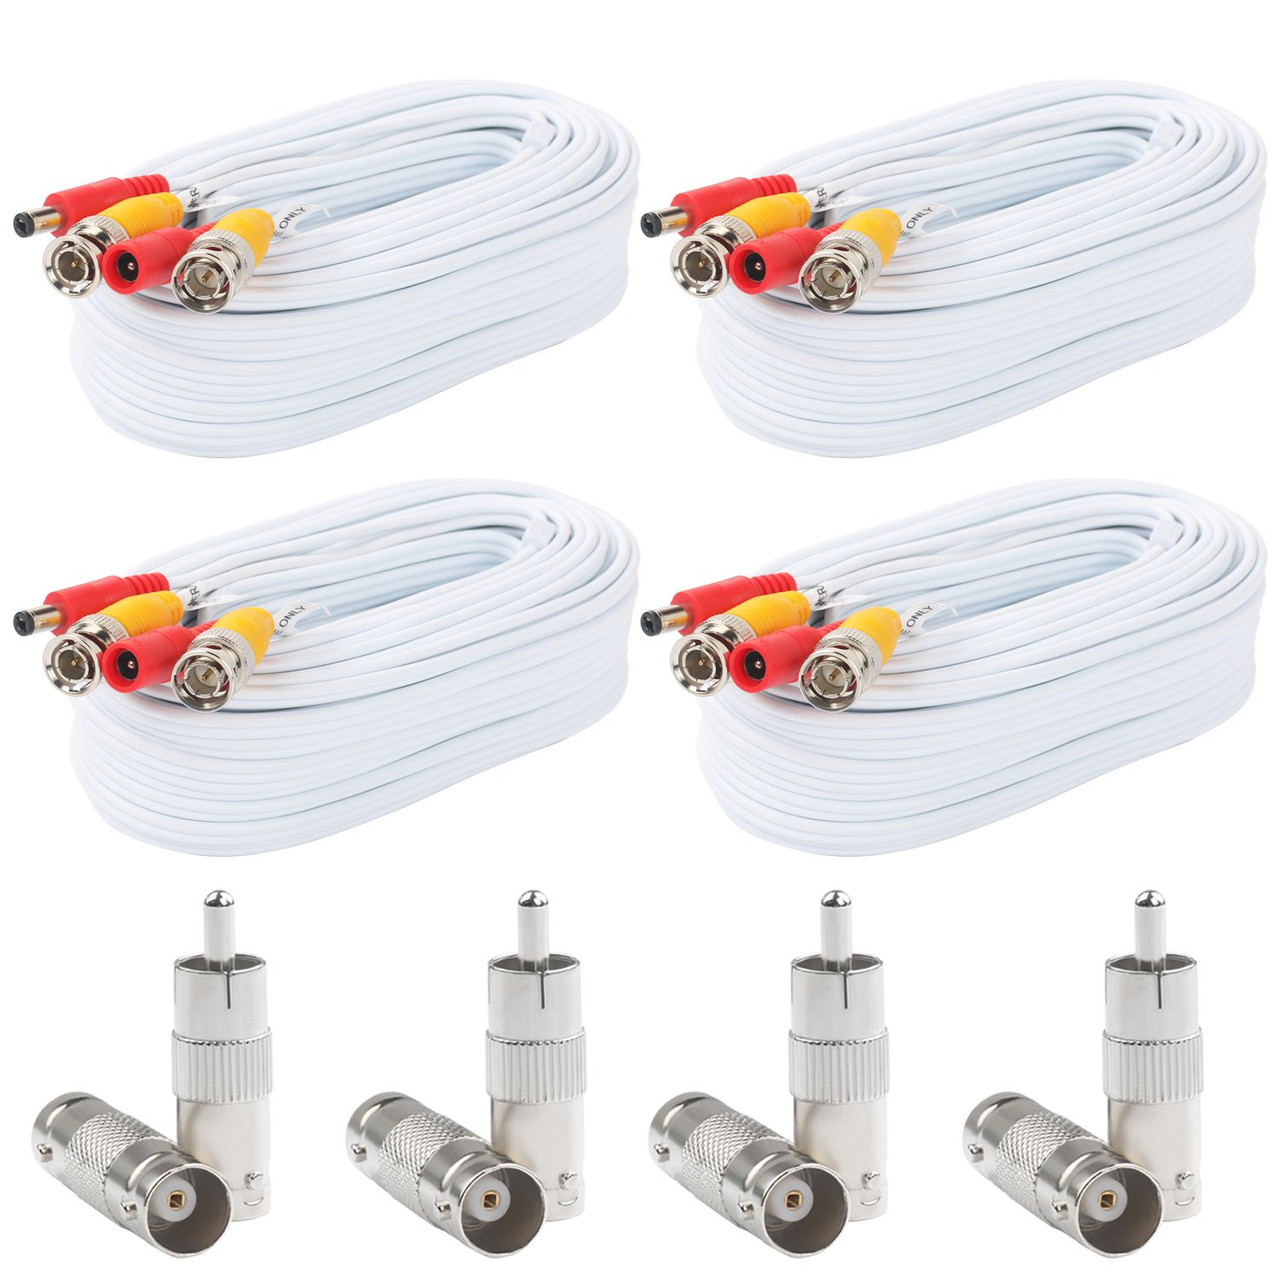 Postta 30Feet (9m ) All-in-One CCTV Video (BNC) + Power Cables , White - 4 Pack Kit - [From 79.00 - Choose pk Qty ] - *Ships from Miami